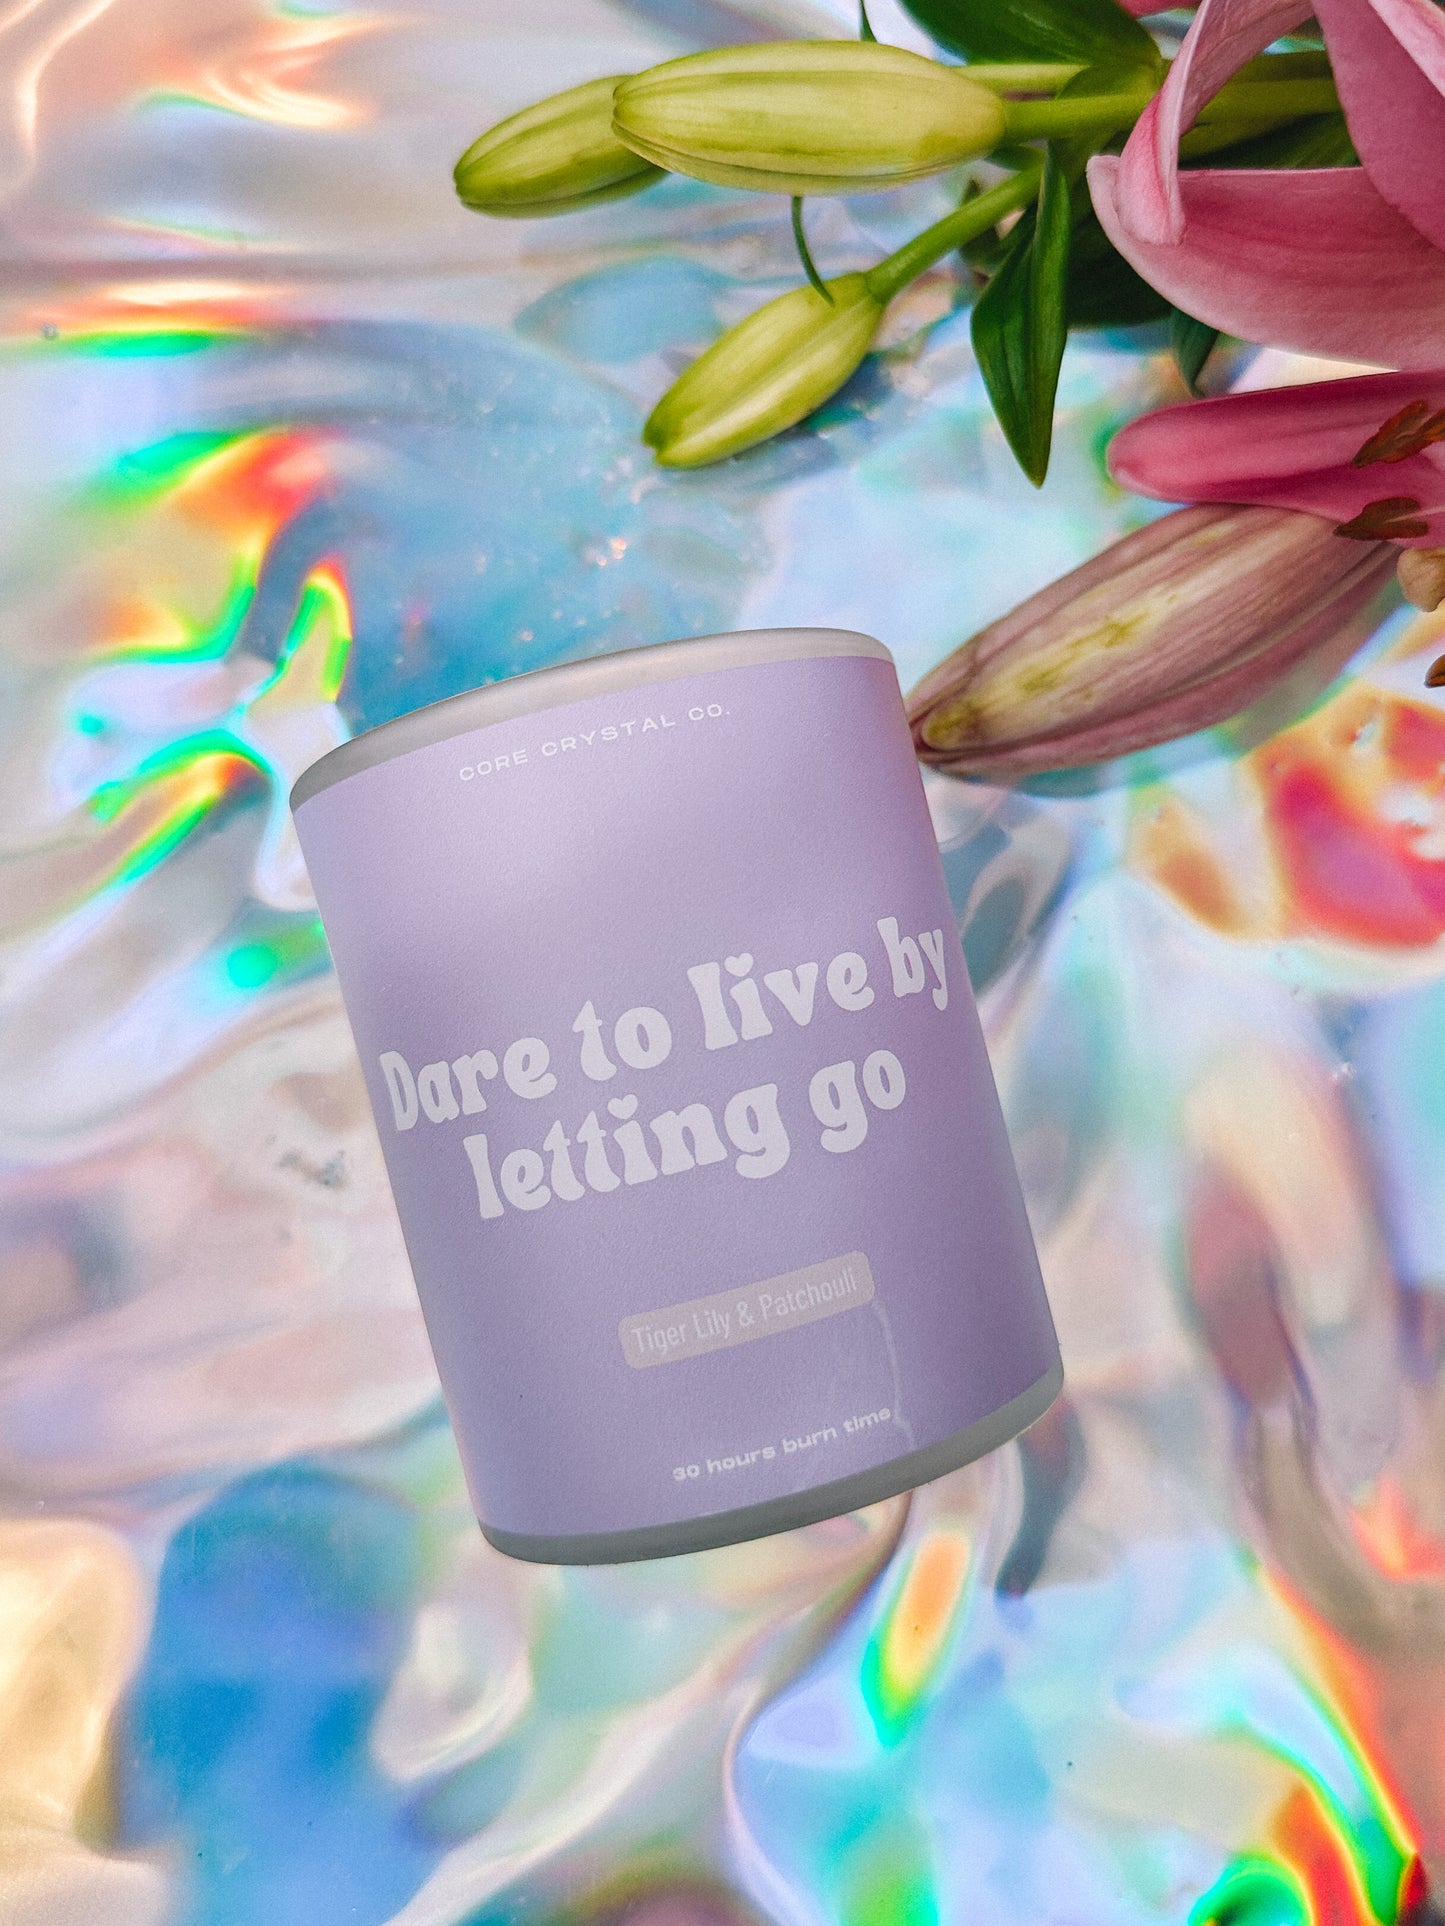 Dare to live by letting go - Tiger Lily & Patchouli Candle